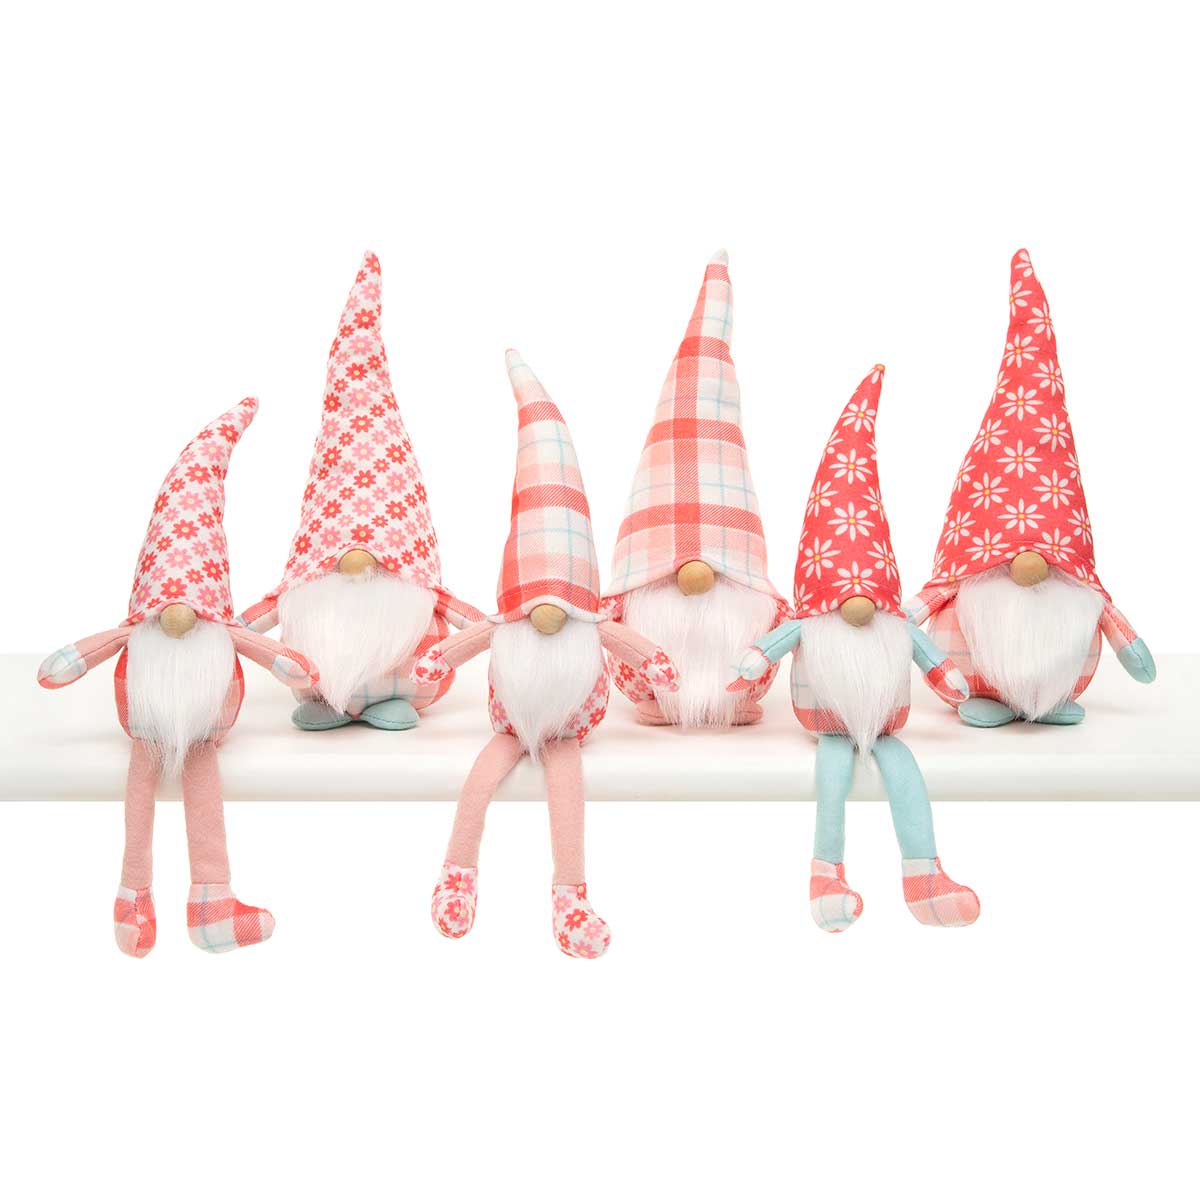 b50 CORAL FAIR GNOMECORAL//WHITE/BLUE WITH WIRED HAT,